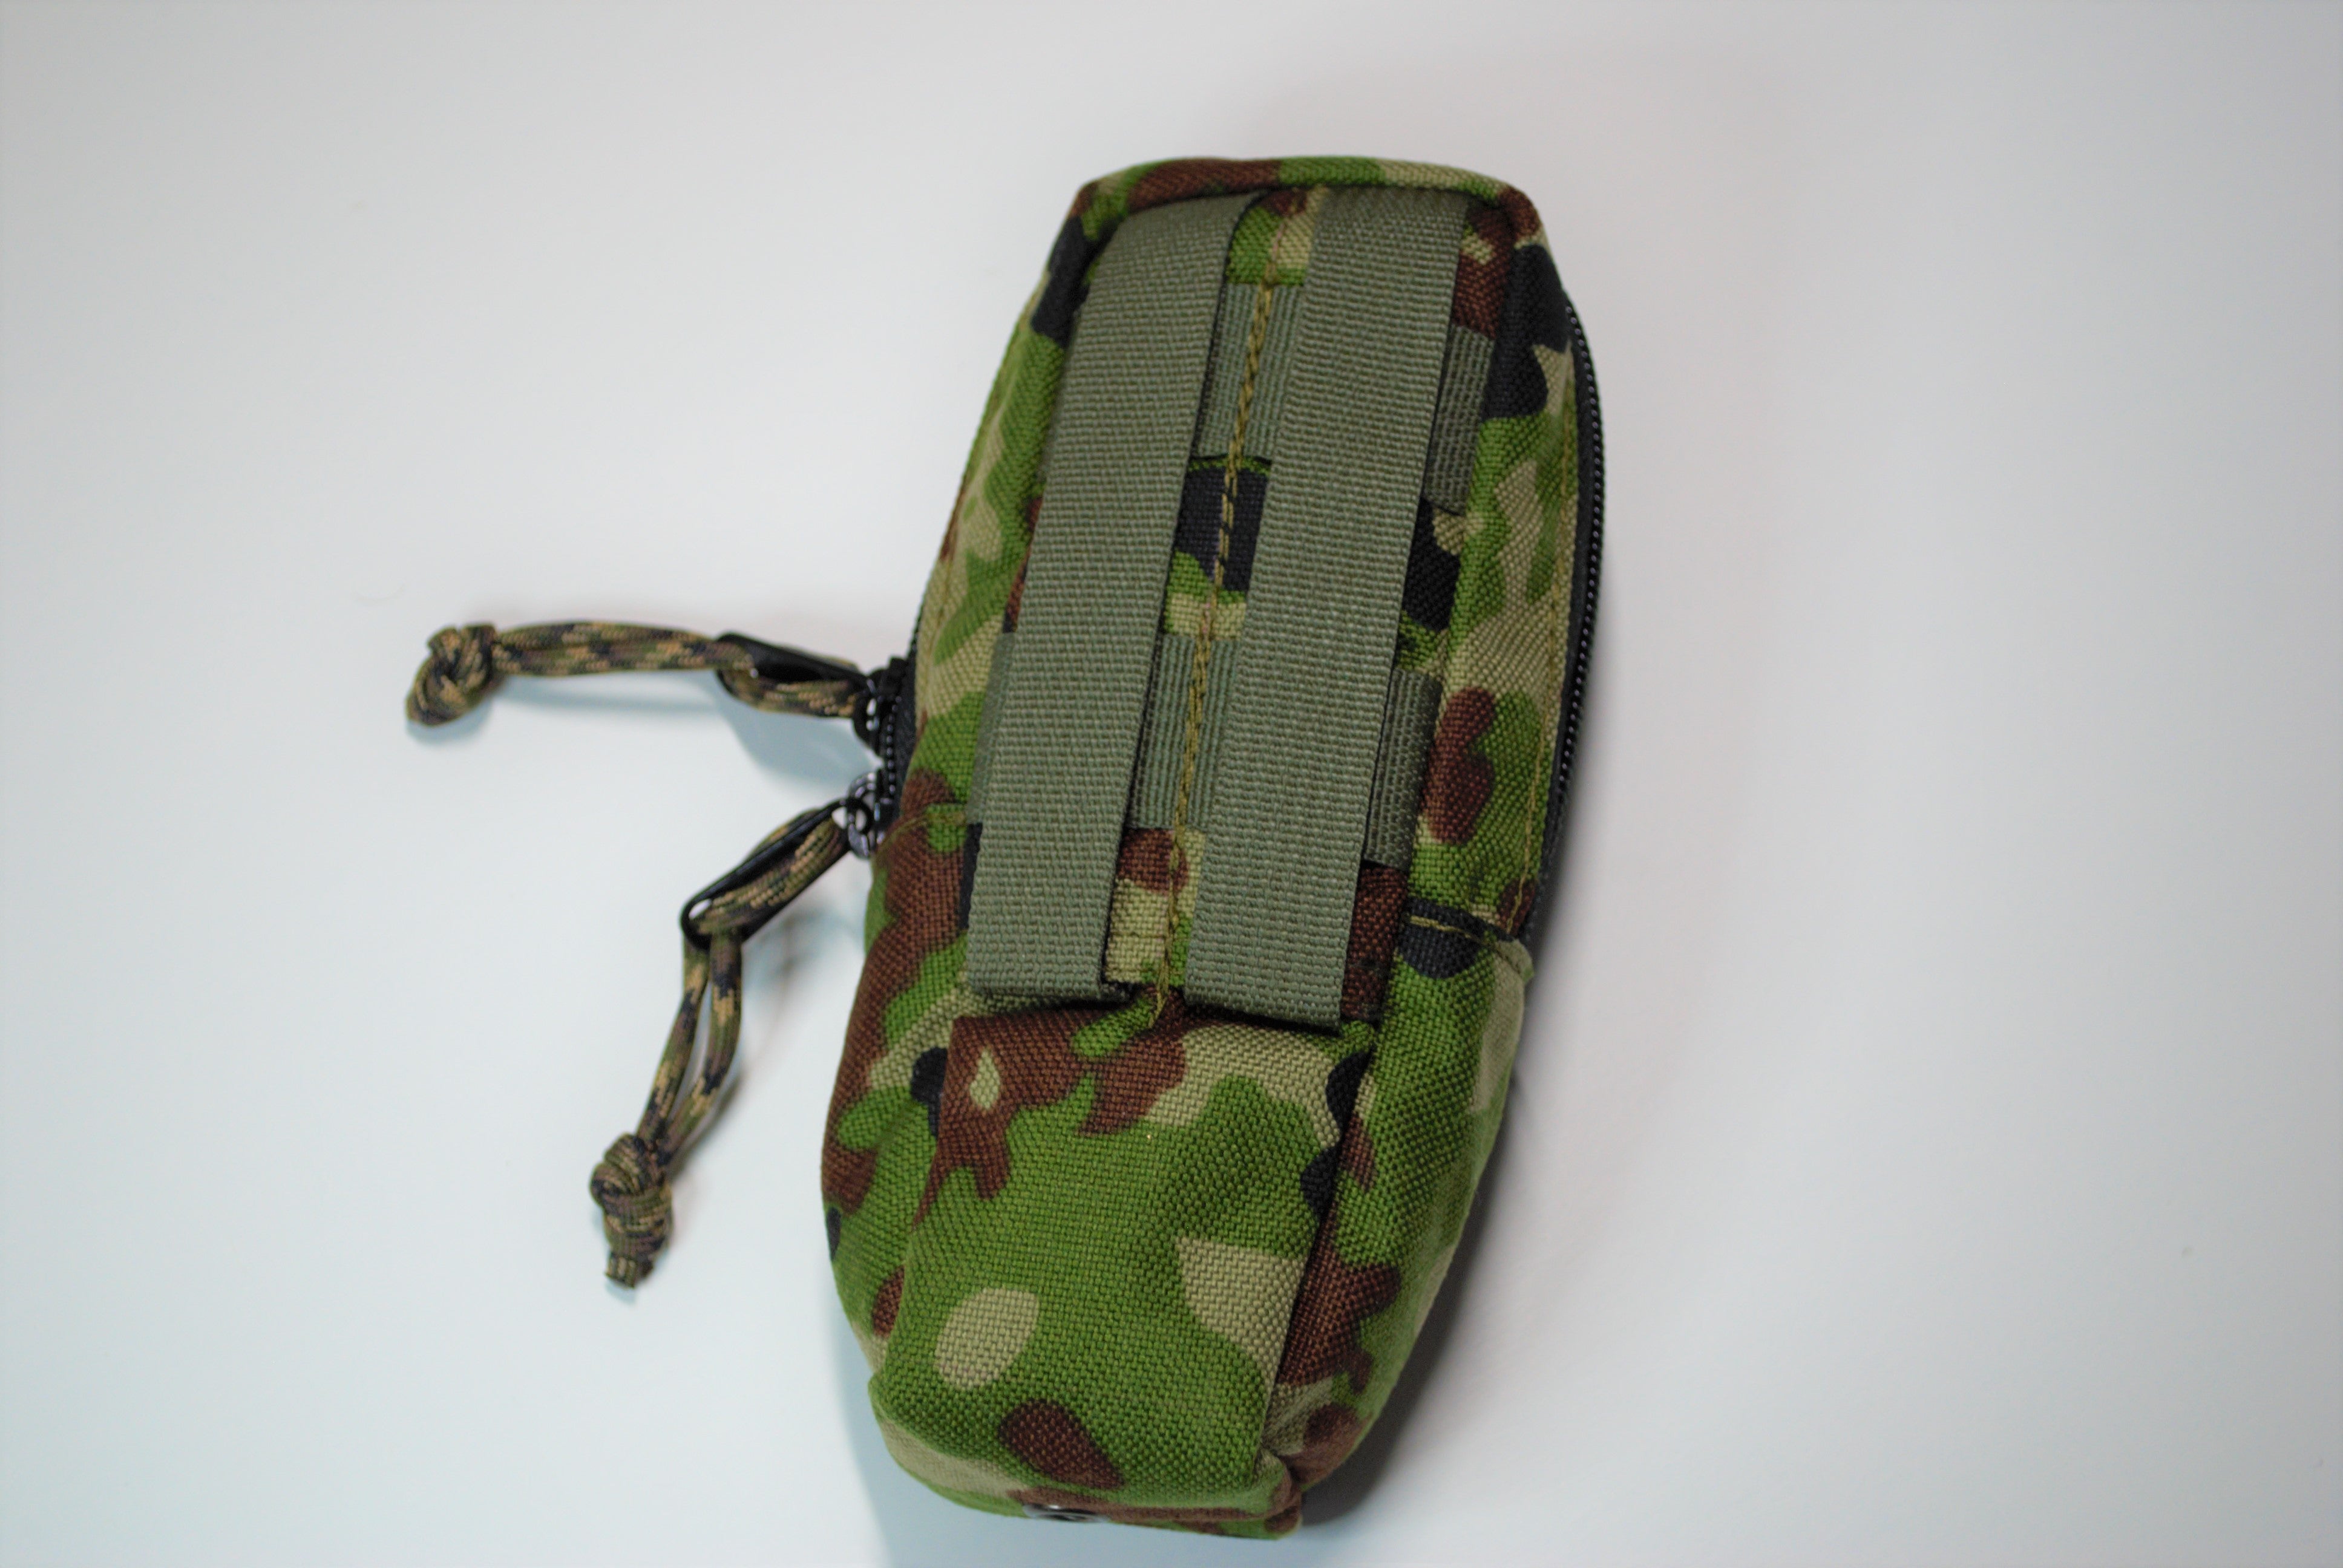 3X Magazine Pouch , Type 20 Assault Rifle – Stagehand Tactical